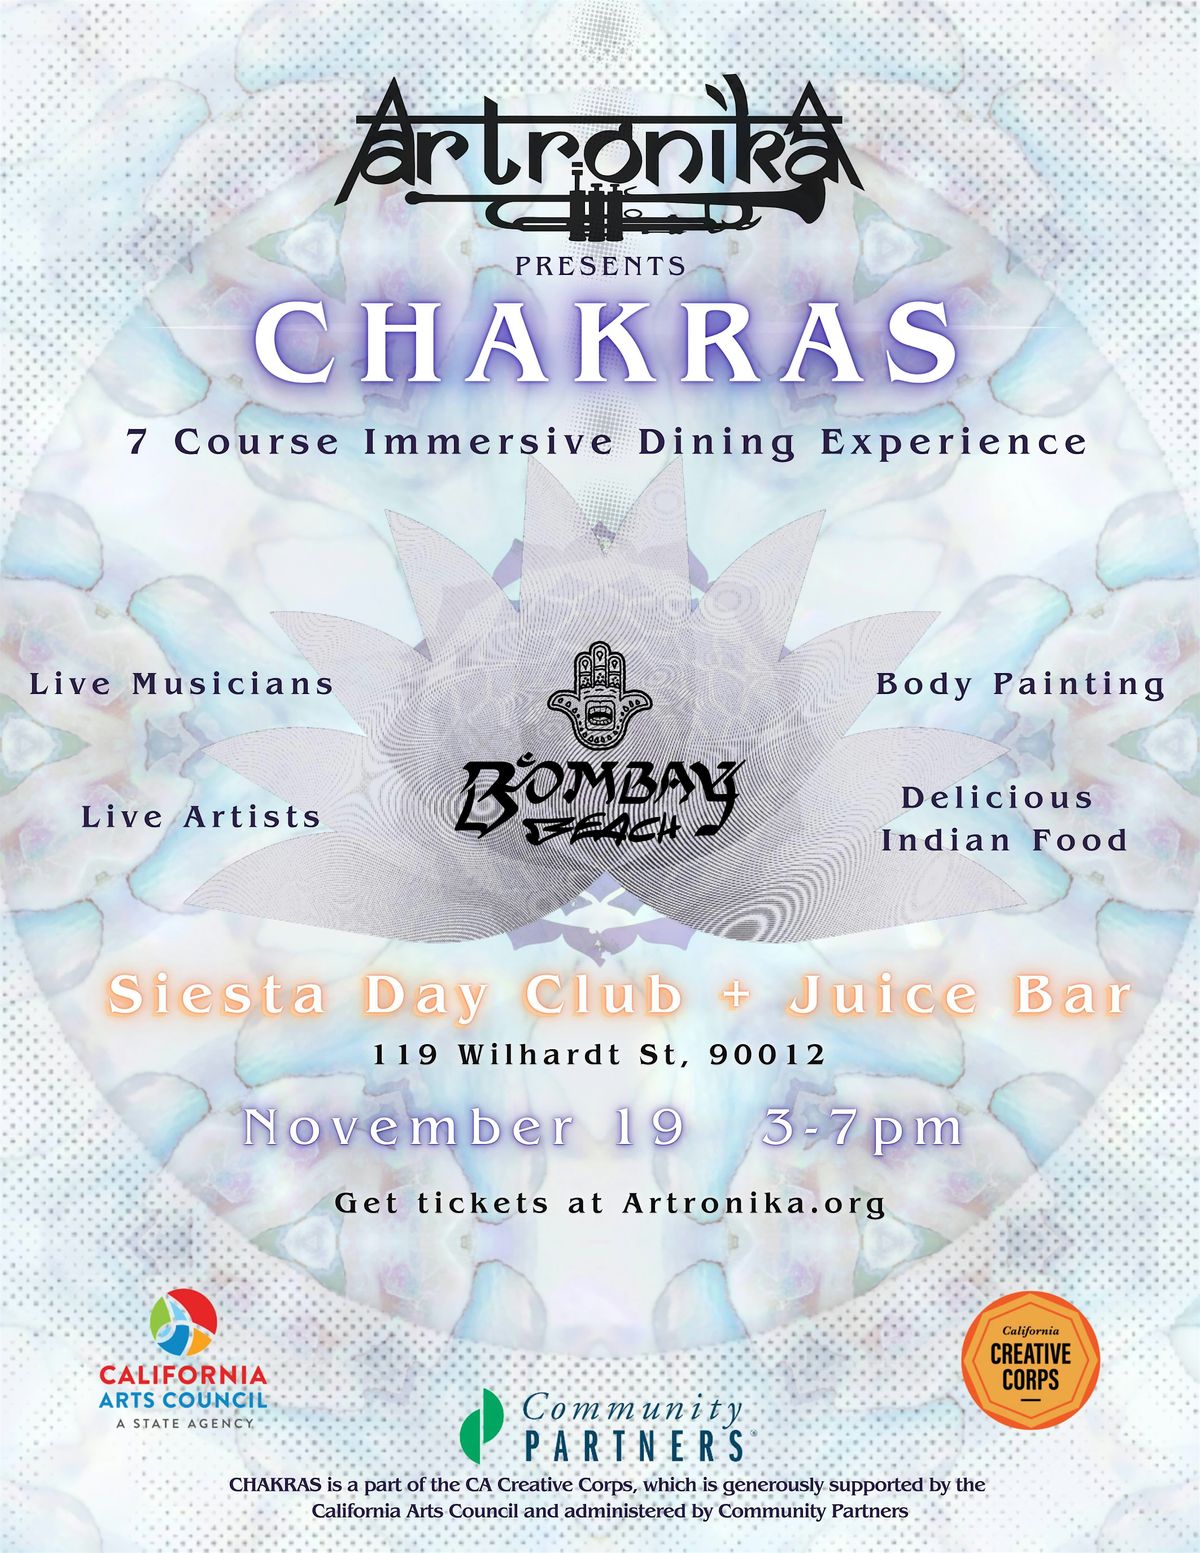 CHAKRAS - 7 course Immersive Indian Dining Experience with Live Music + Art